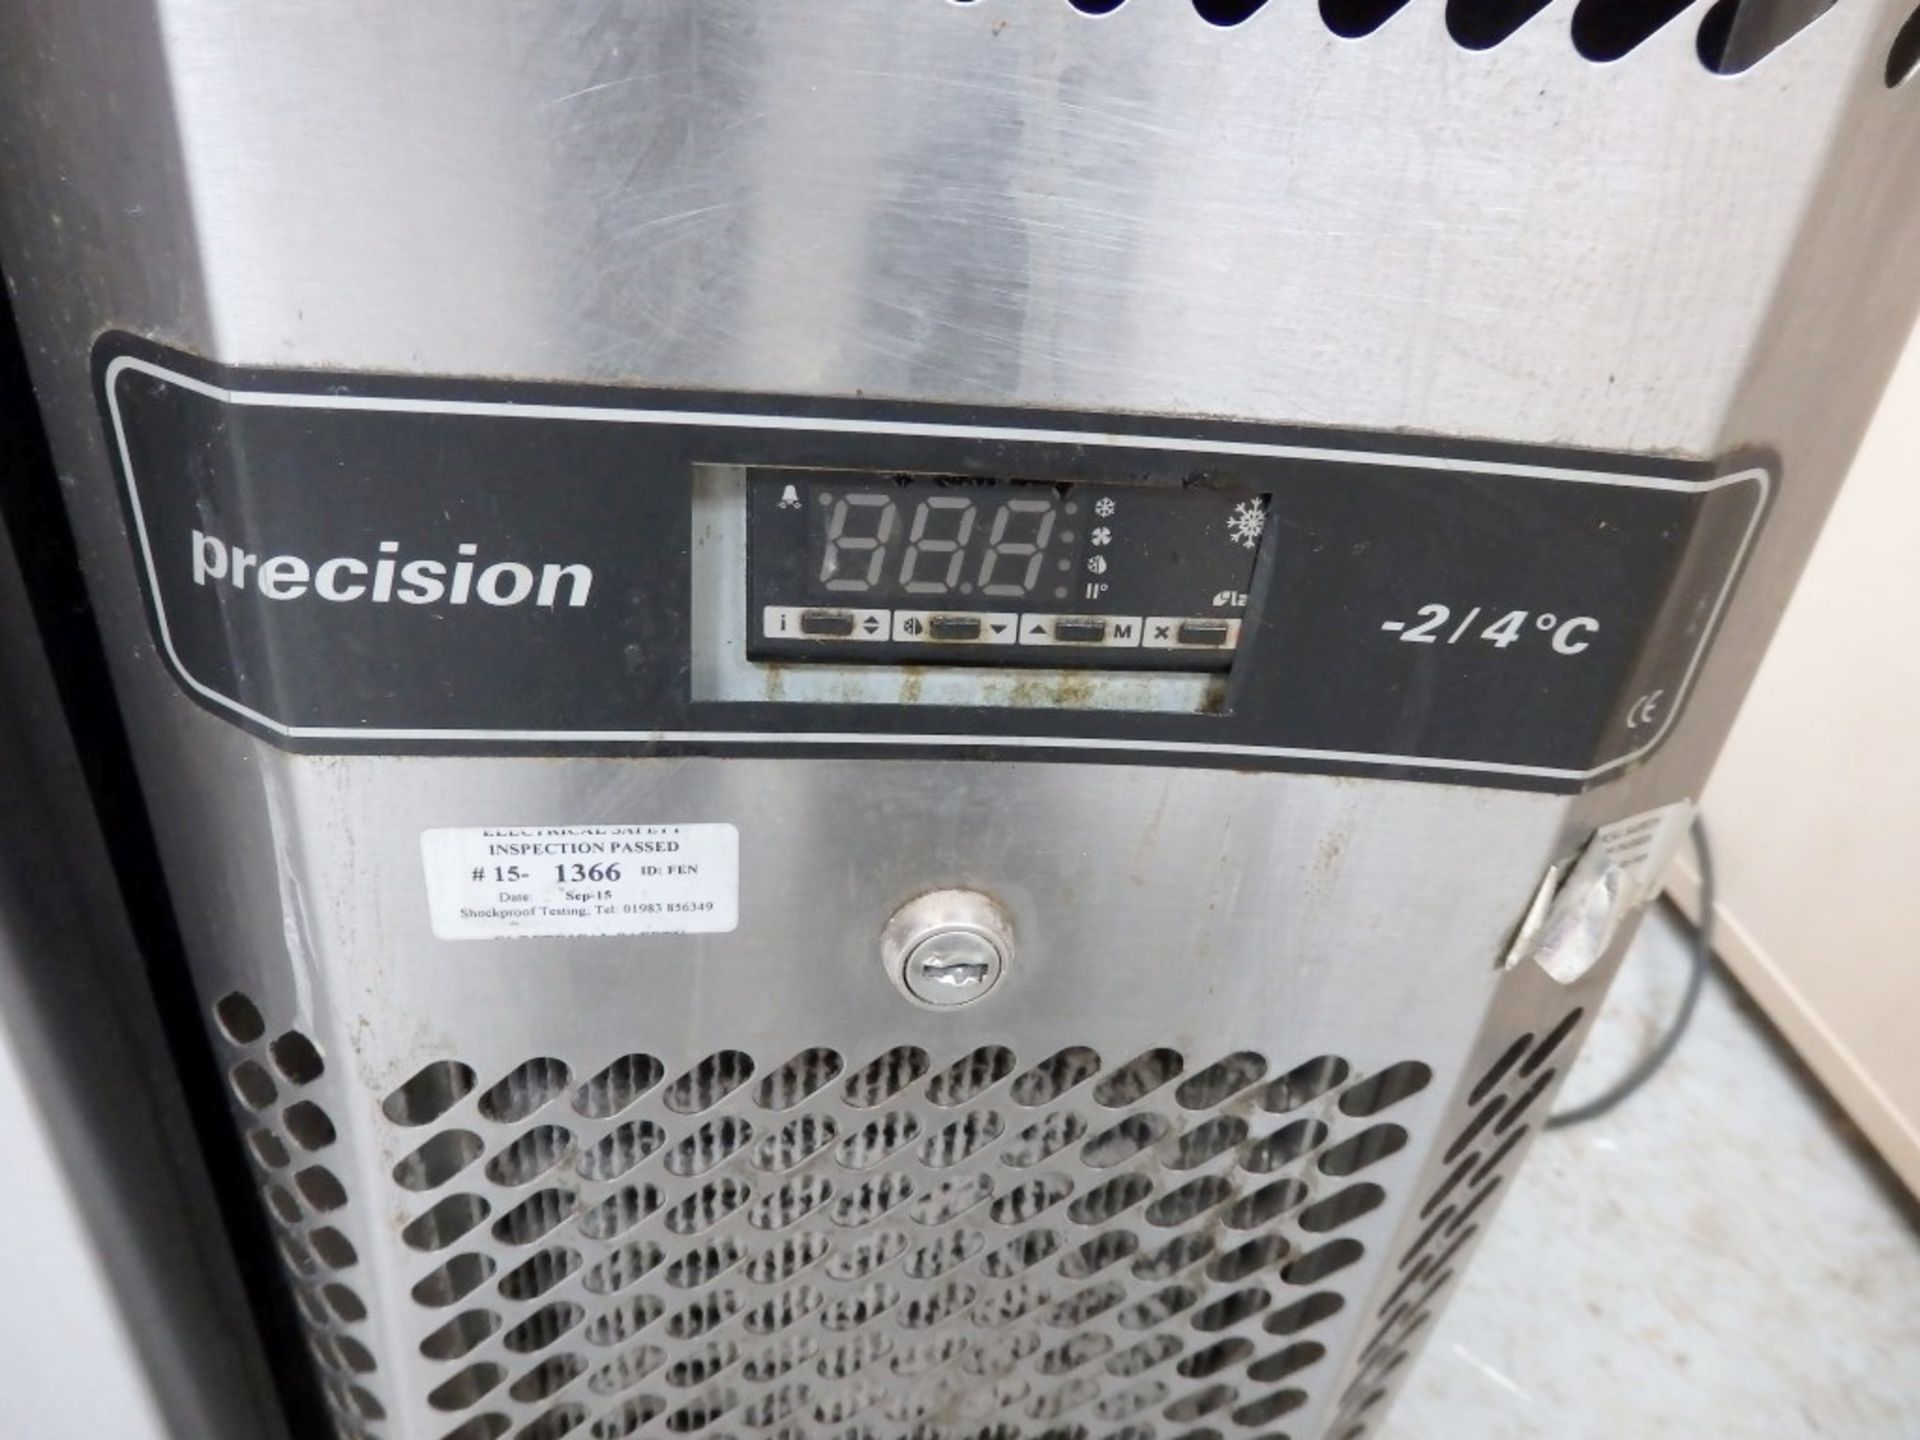 1 x "Precision" Commercial Refrigerator Counter With 3-Door Storage - Model: Gastronorm MCU-311 - - Image 12 of 12